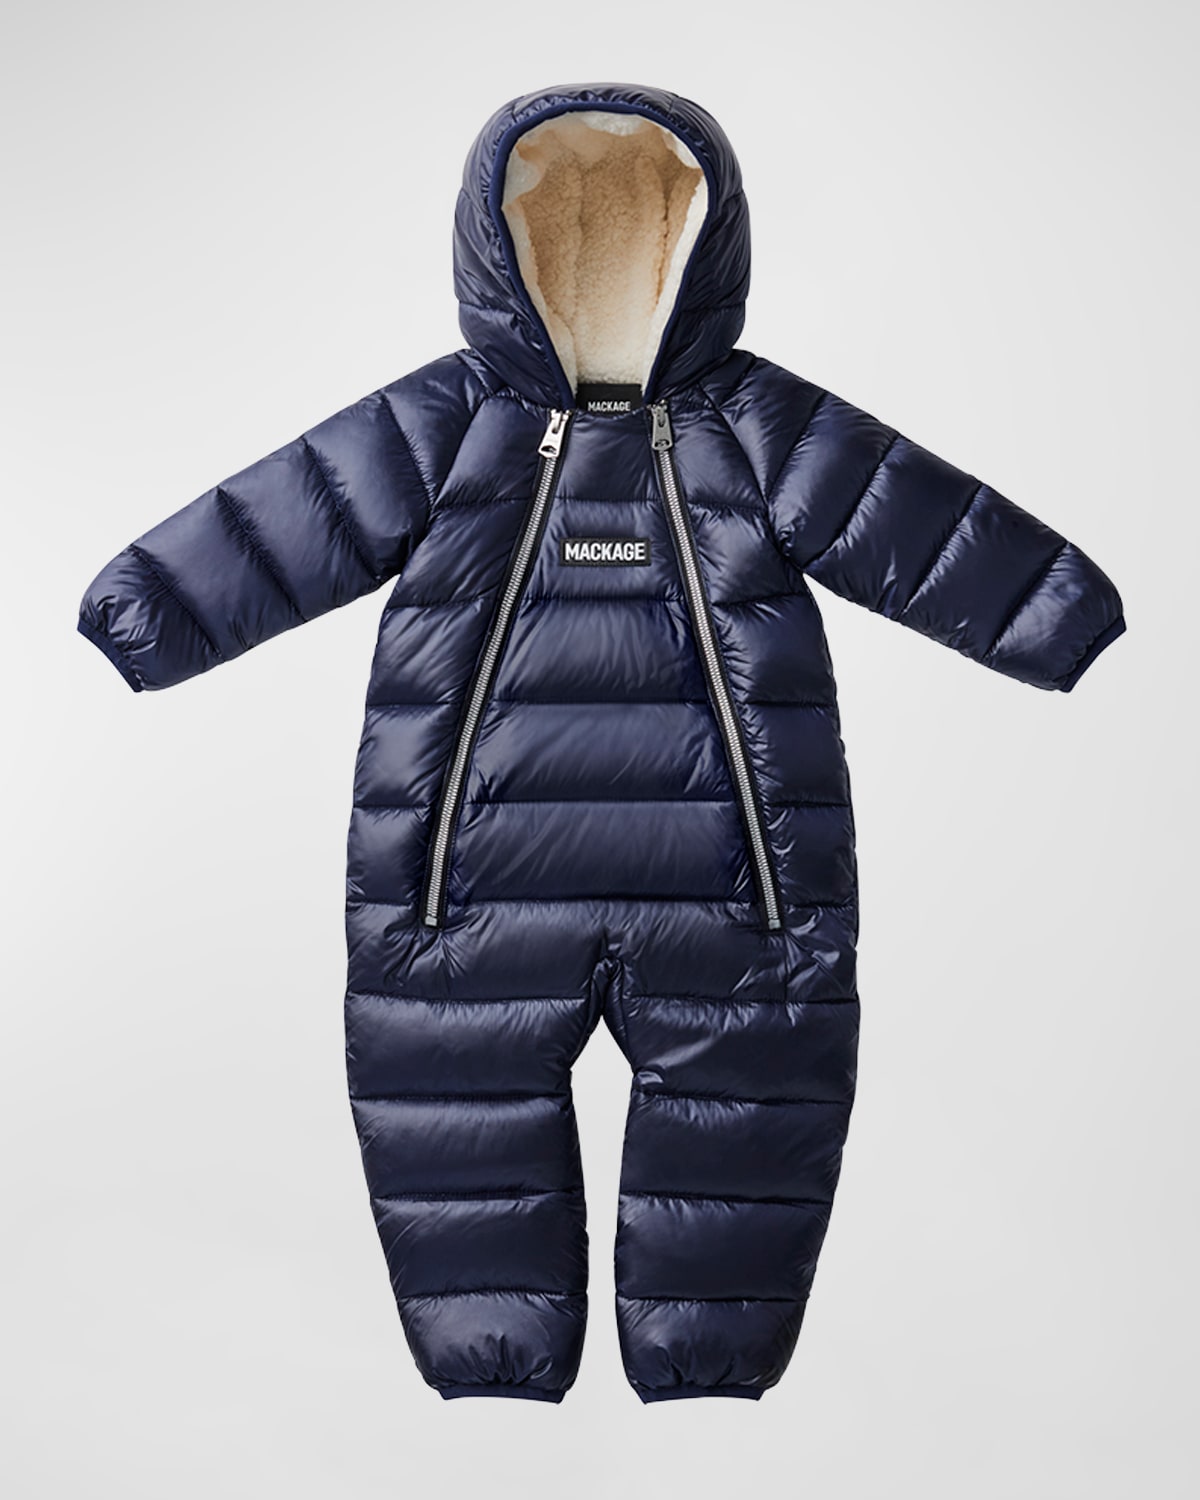 MACKAGE KID'S BAMBI RECYCLED QUILTED SNOWSUIT